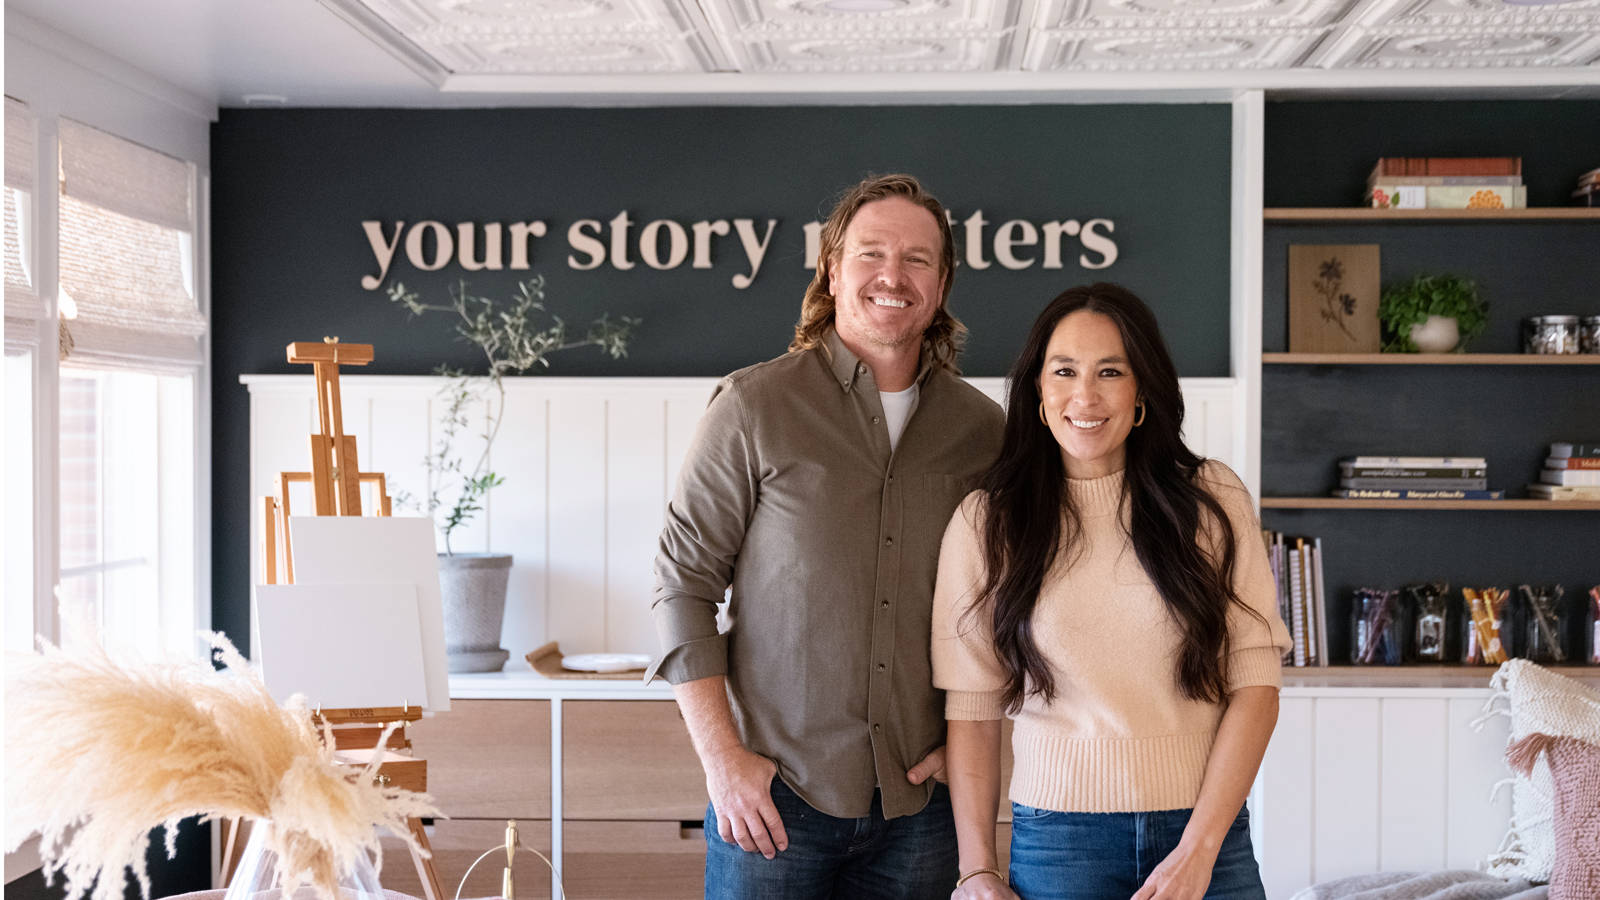 Joanna Gaines With Her Husband Chip Gaines On The Set Of Fixer Upper. Background